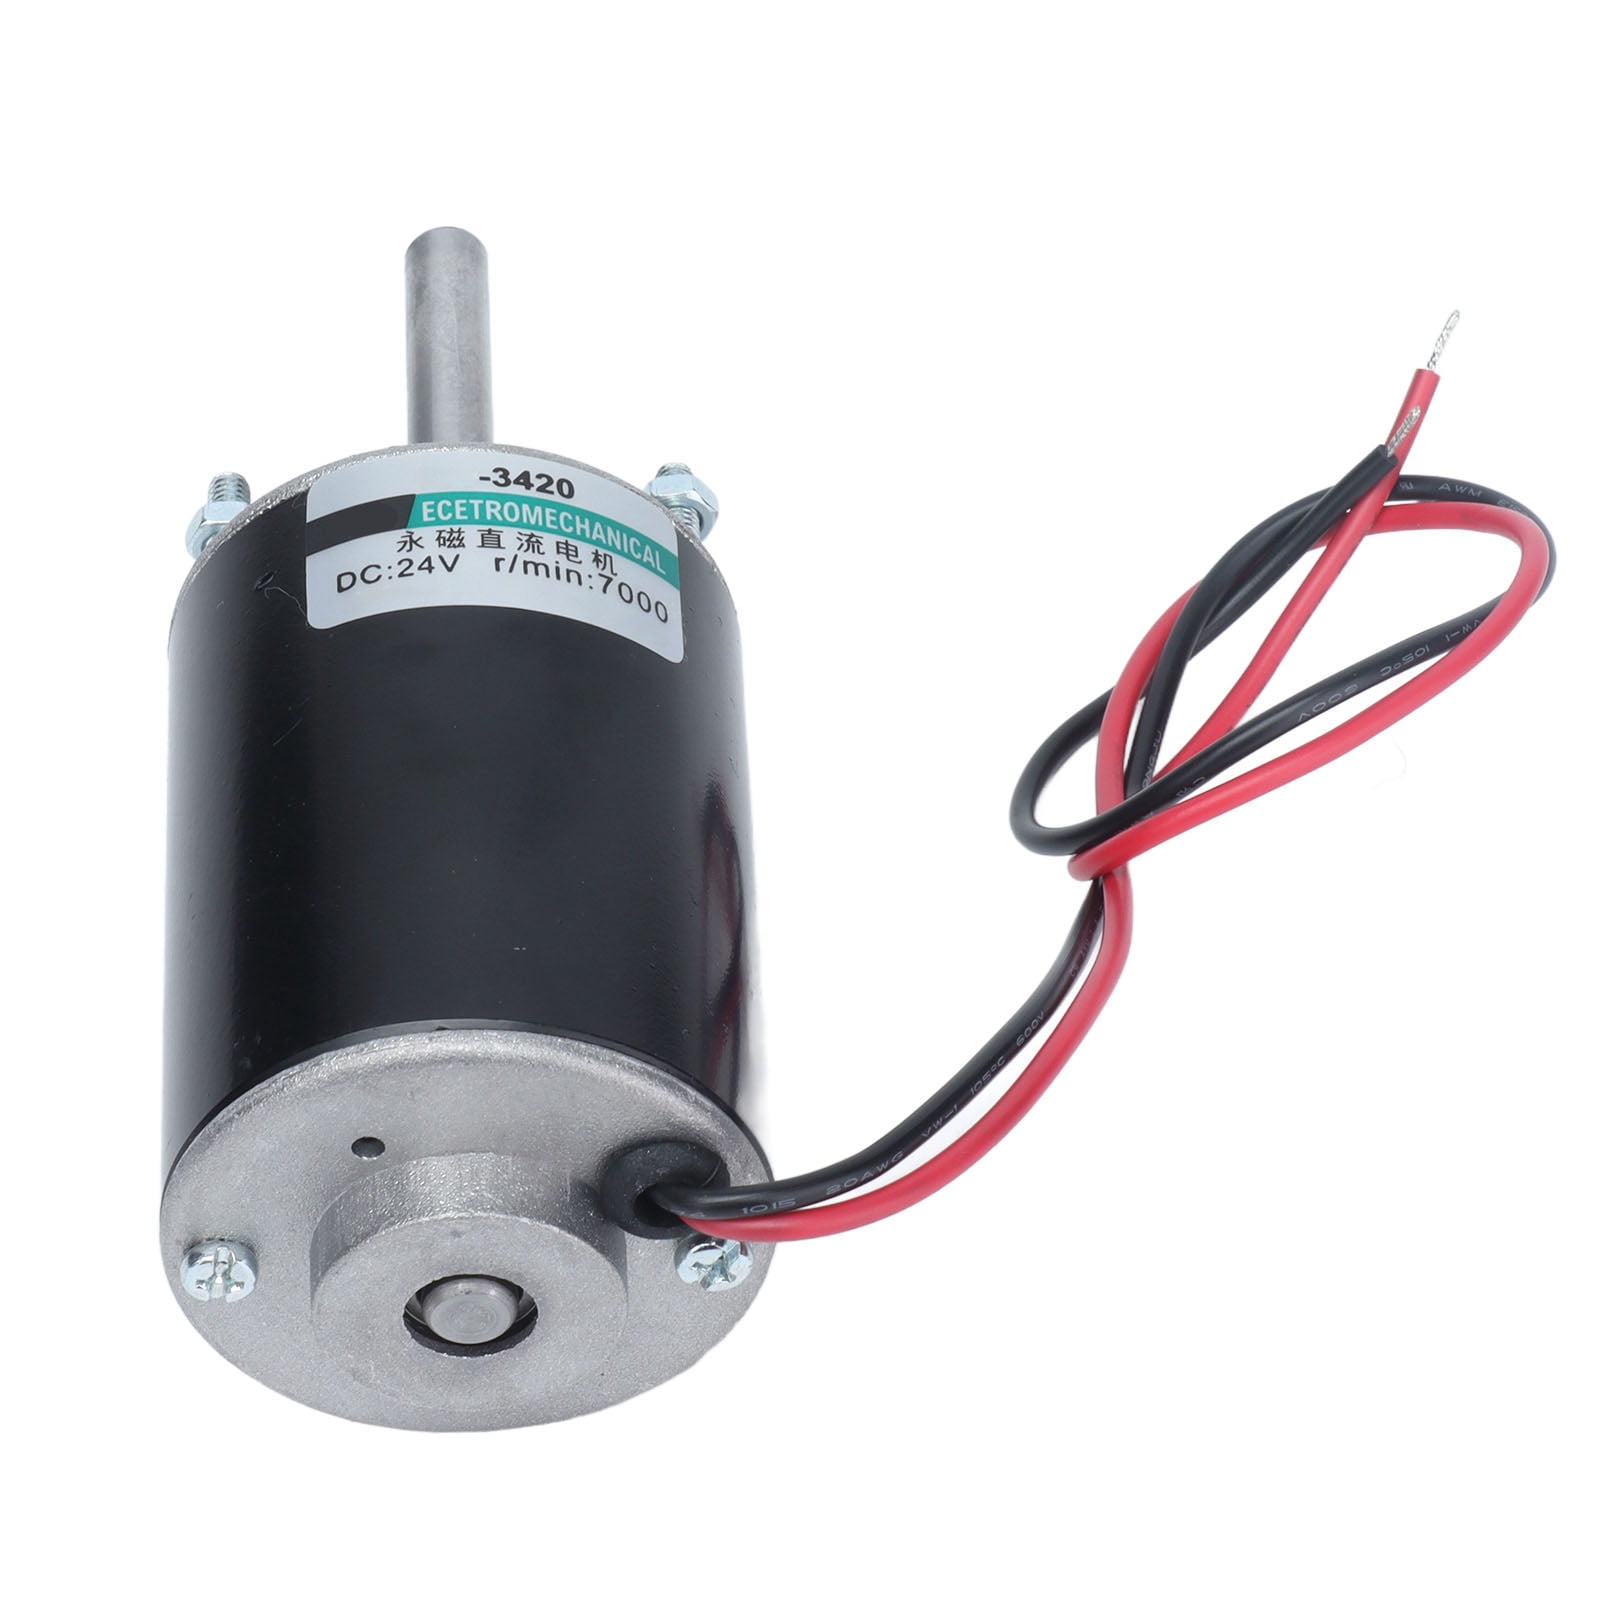 24V 30W 7000RPM High Speed CW/CCW Reversible Permanent Magnet DC Motor 